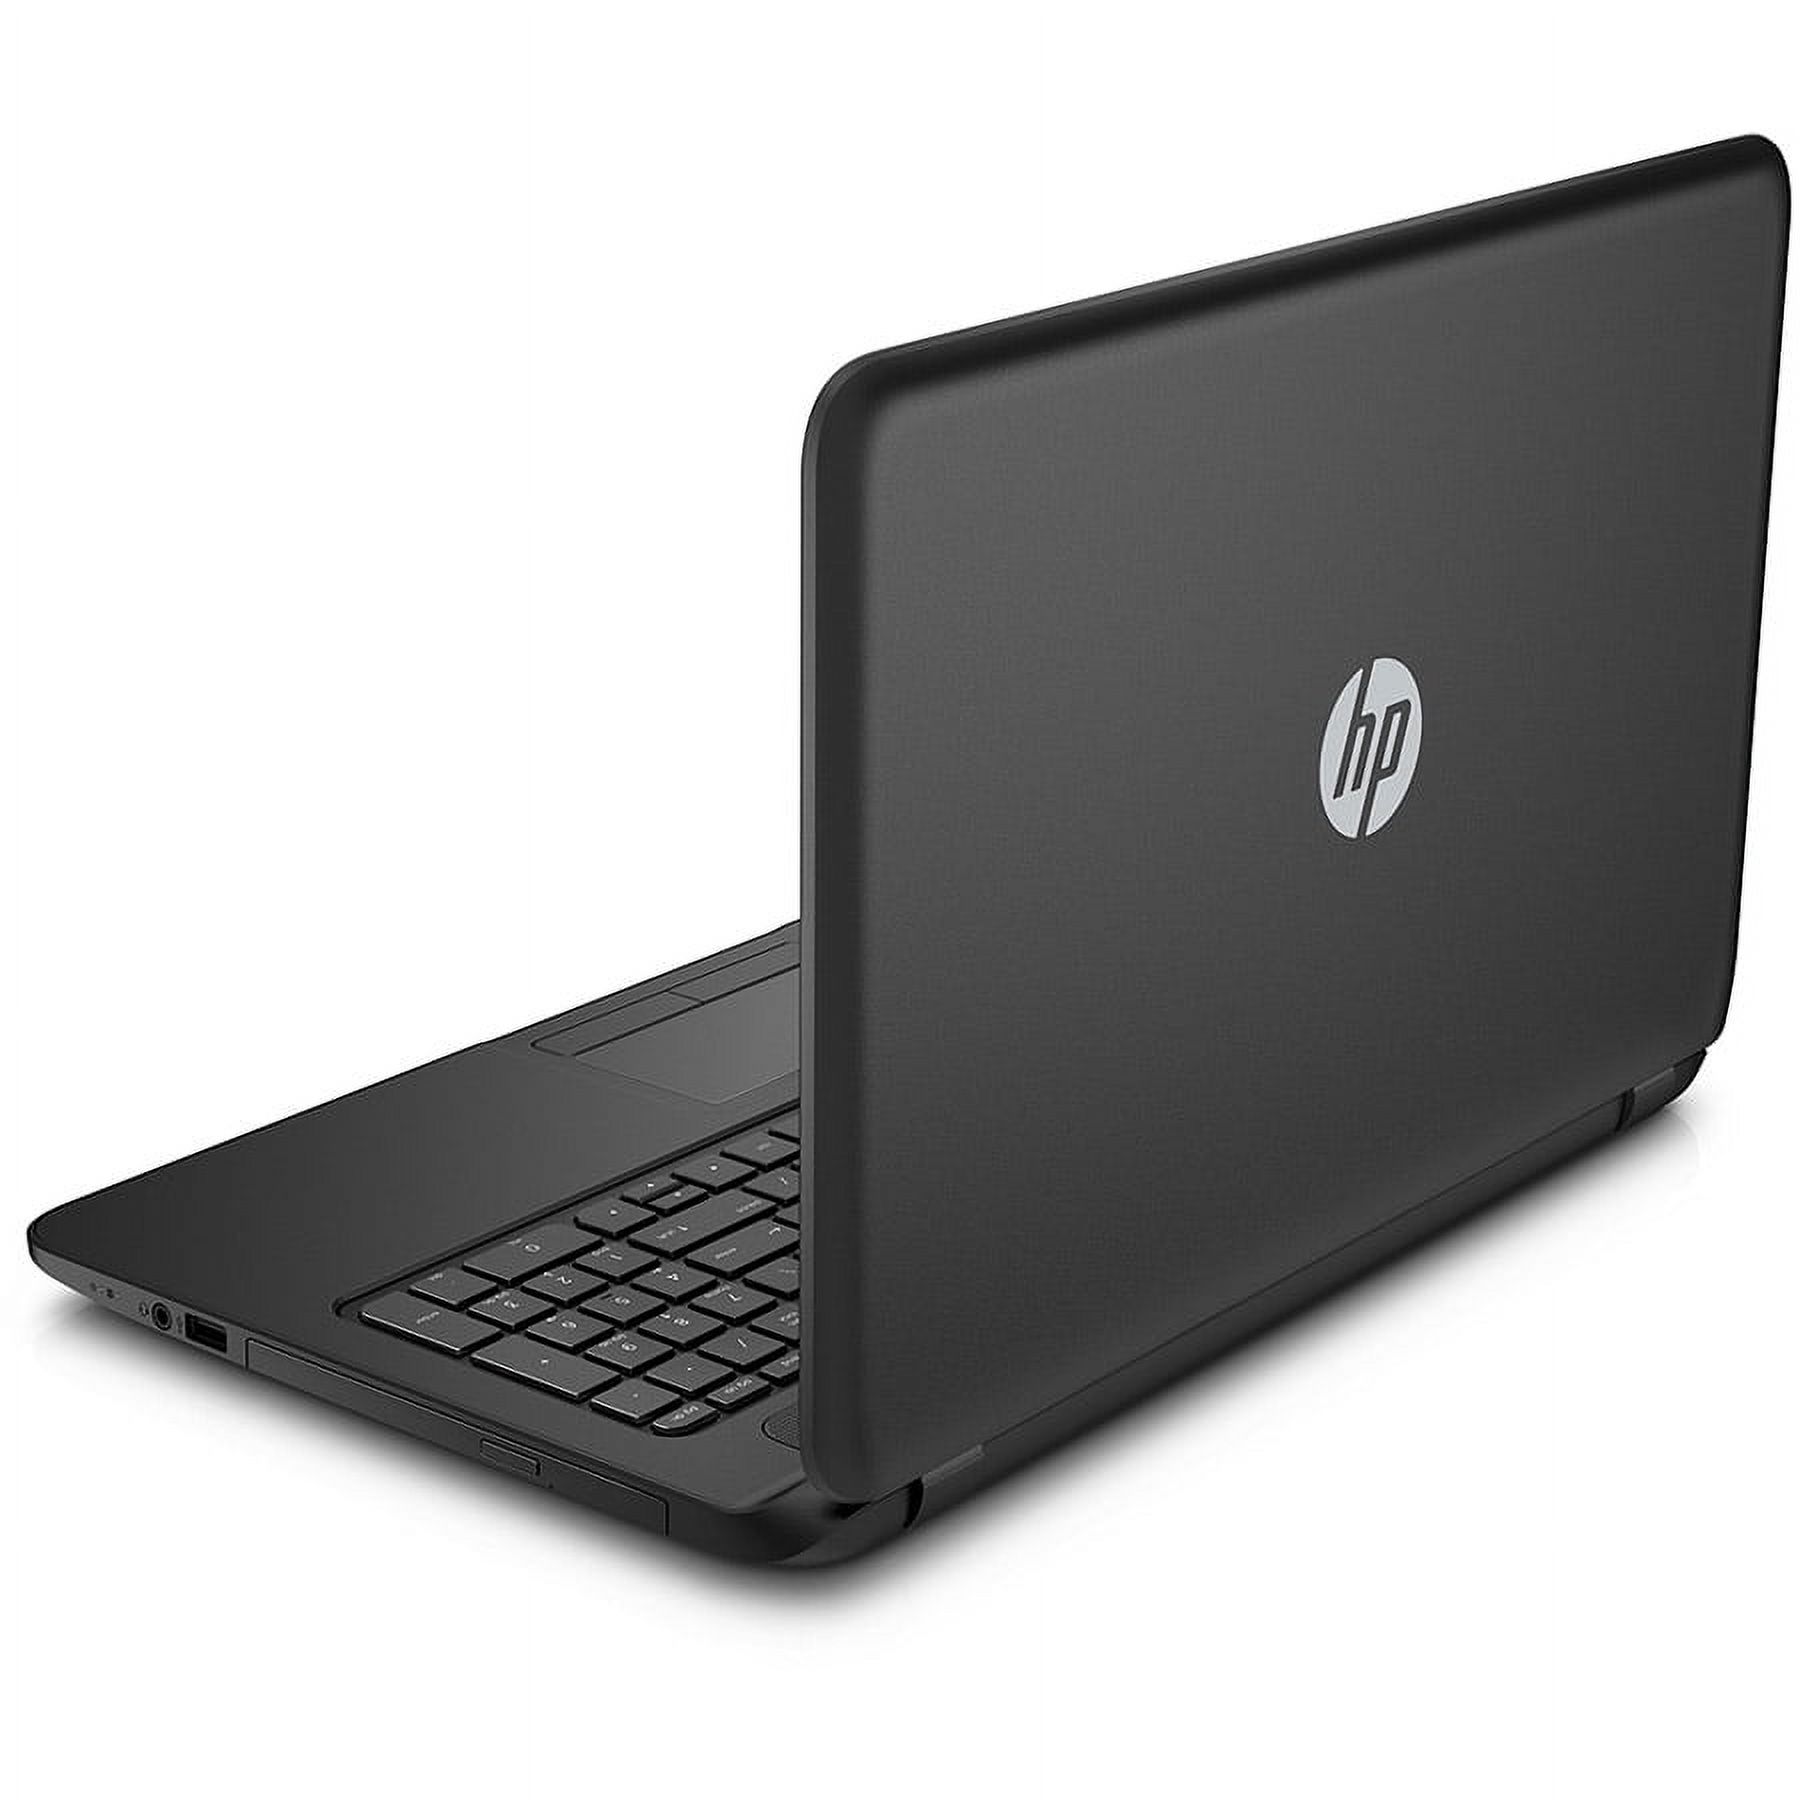 HP 15-F125WM Intel Celeron N2940 X4 1.83GHz 4GB 500GB DVD+/-RW 15.6" Win8.1, Black (Used) - image 4 of 4